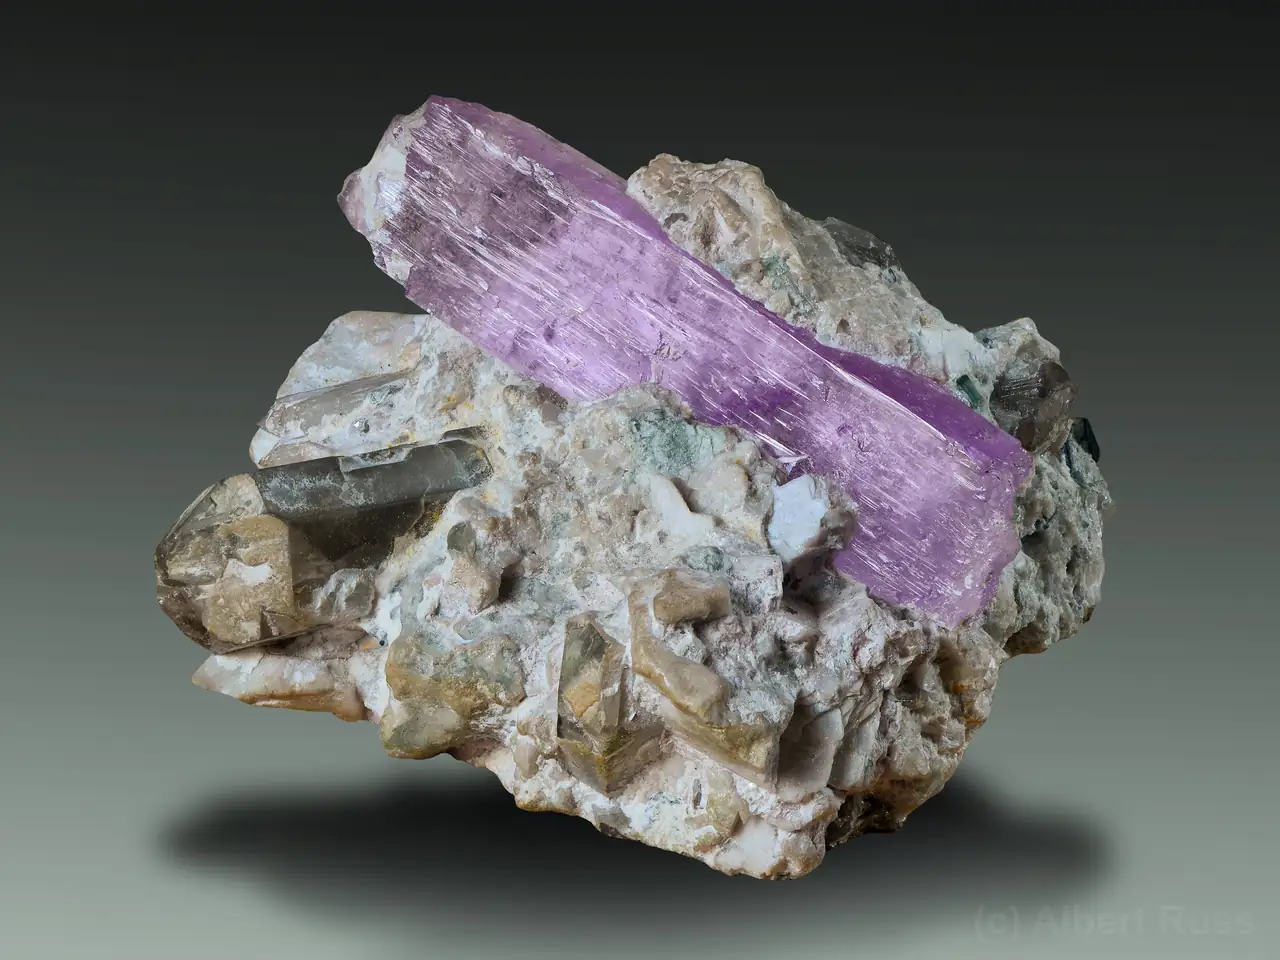 Pink spodumene (var. kunzite) crystal with quartz and unspecific clay minerals from Laghman, Afghanistan